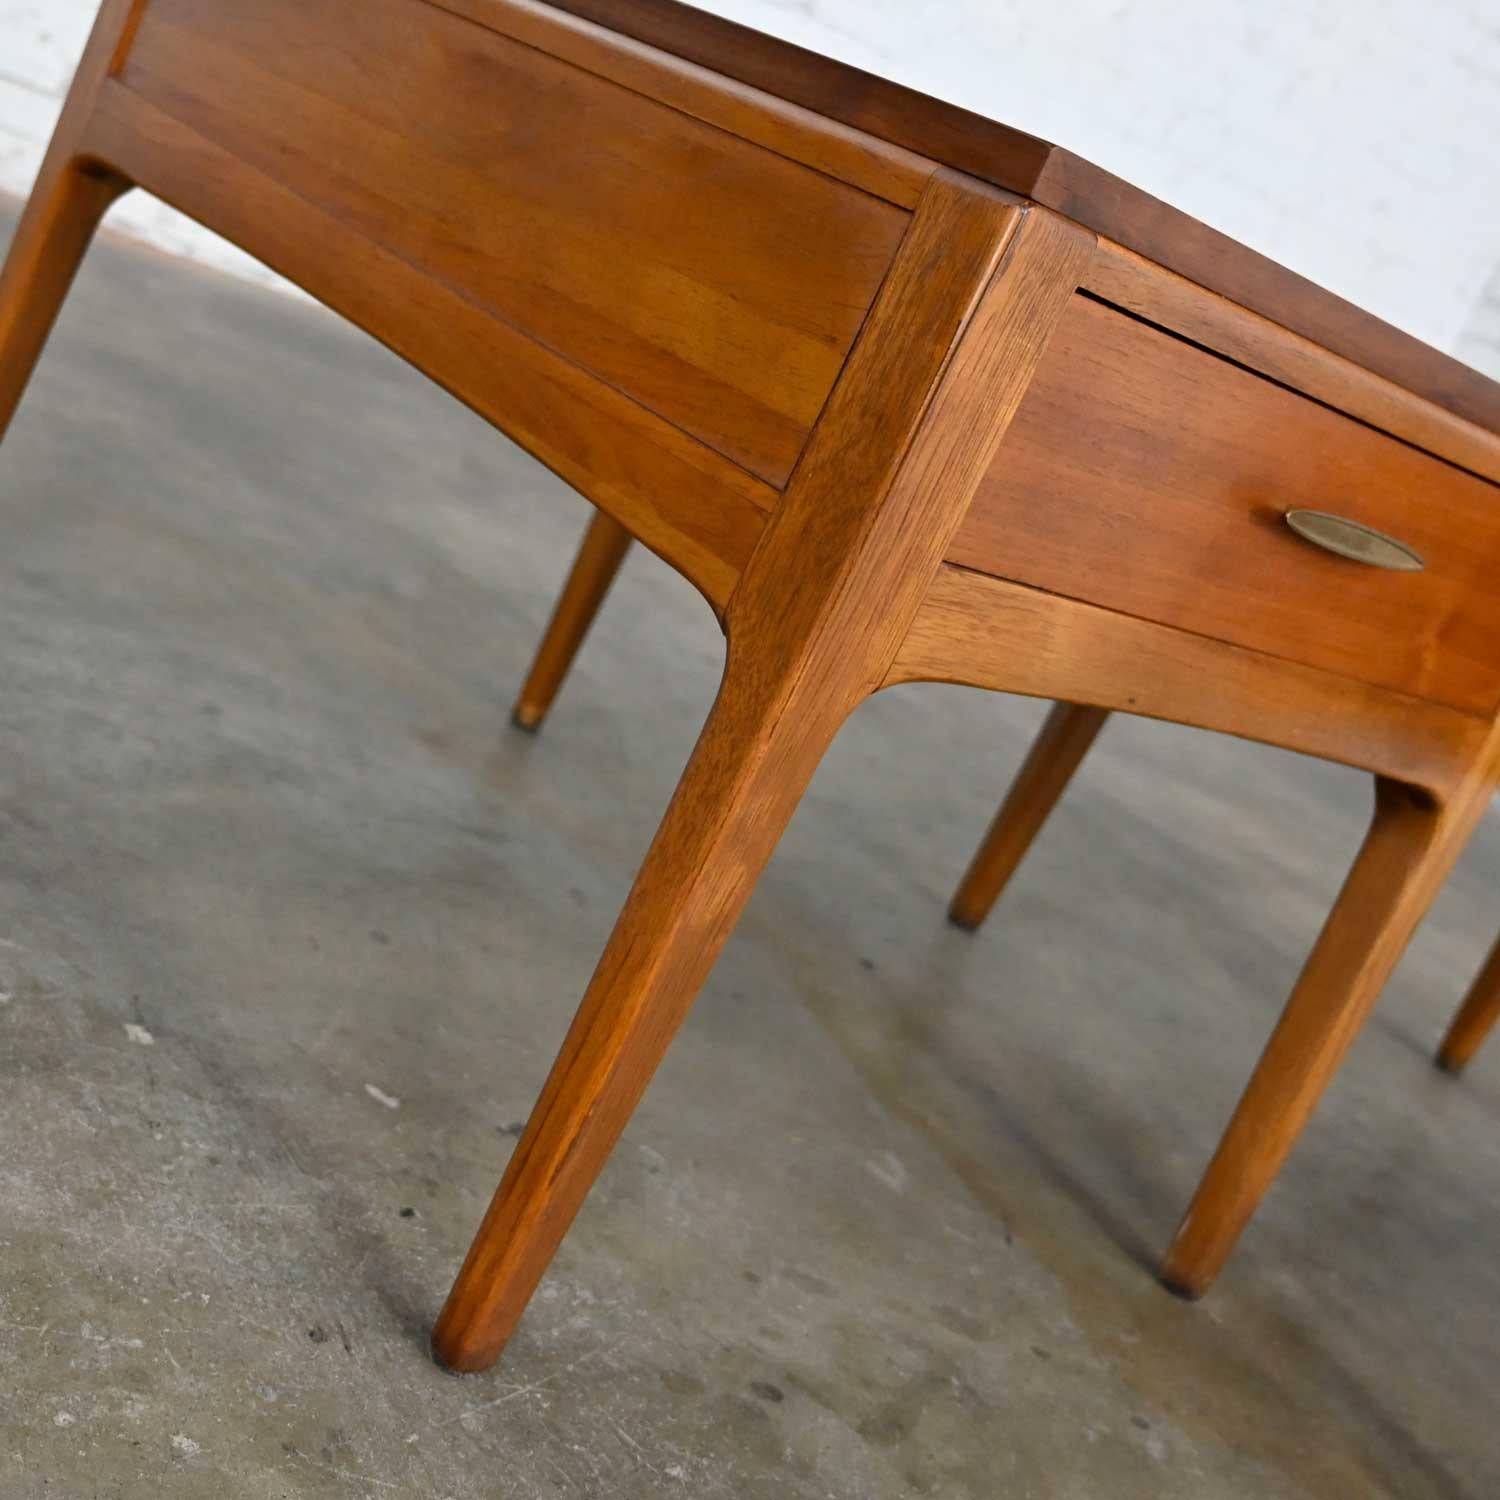 20th Century Mid-Century Modern Lane Rhythm Collection Walnut End Tables a Pair For Sale